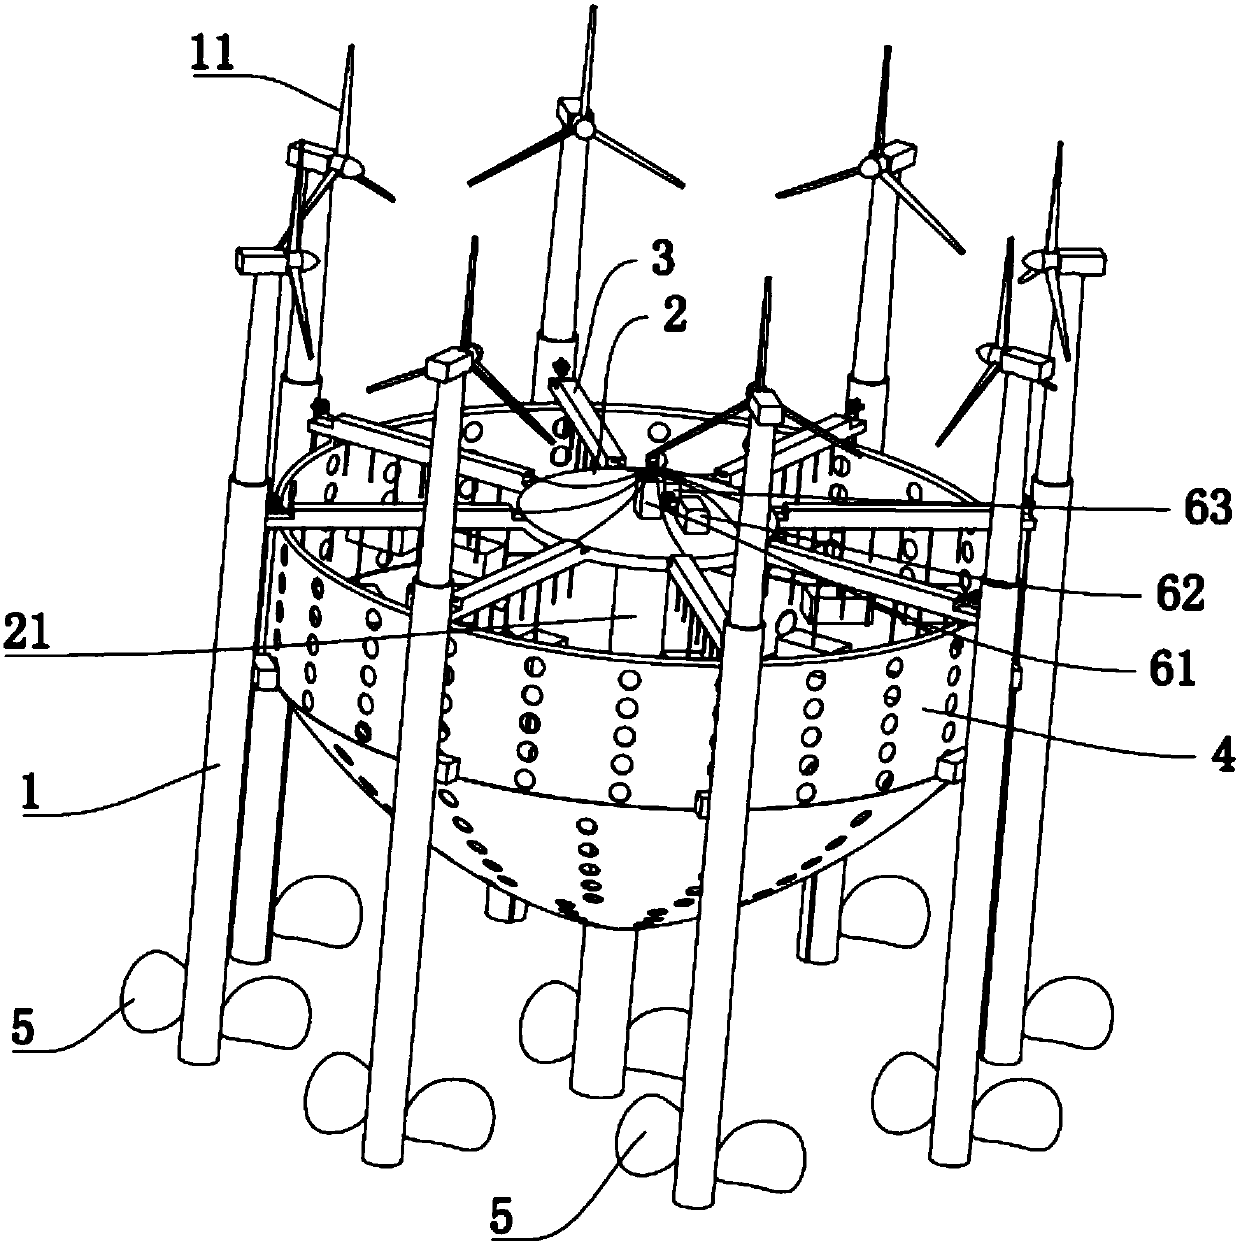 A marine farming method and device based on an offshore wind farm